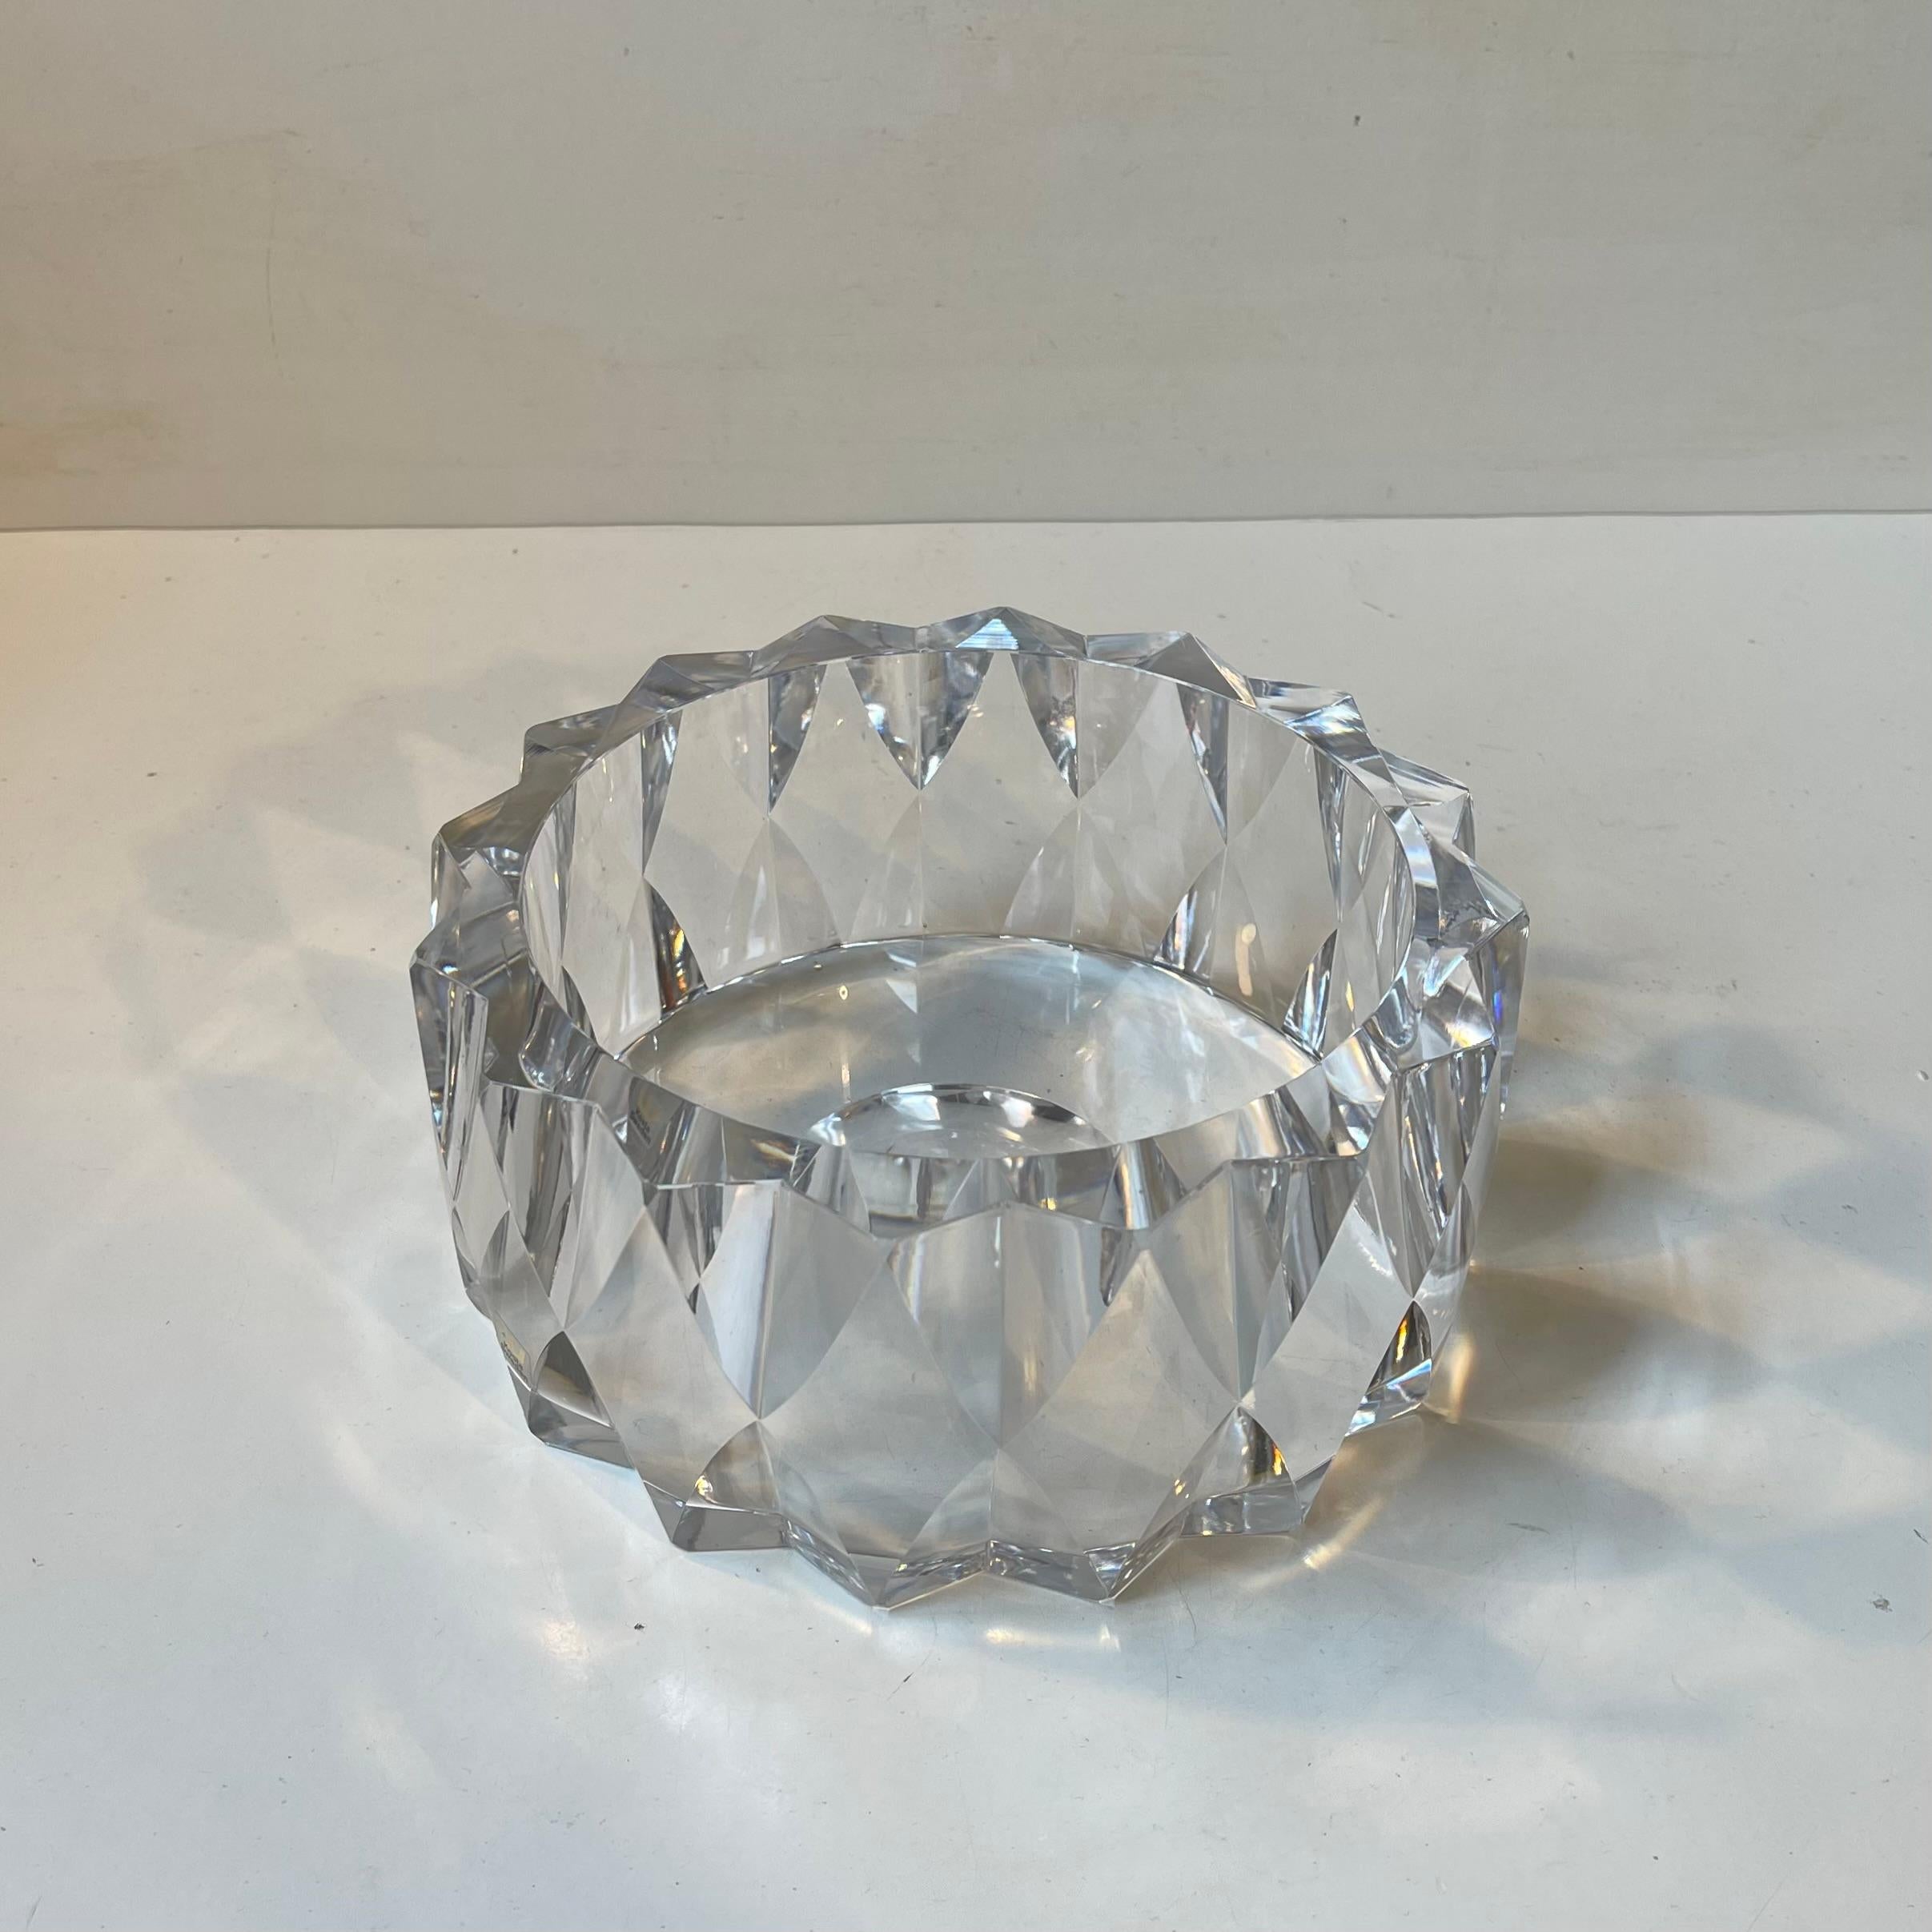 A massive centerpiece bowl in cut crystal. Very sculptural: multi-faceted, thick edges and very heavy. Designed by the iconic Swedish glass wizard Göran Wärff during the 1980s. Its hand-signed to its base by the artist and maker. Sticker from Kosta